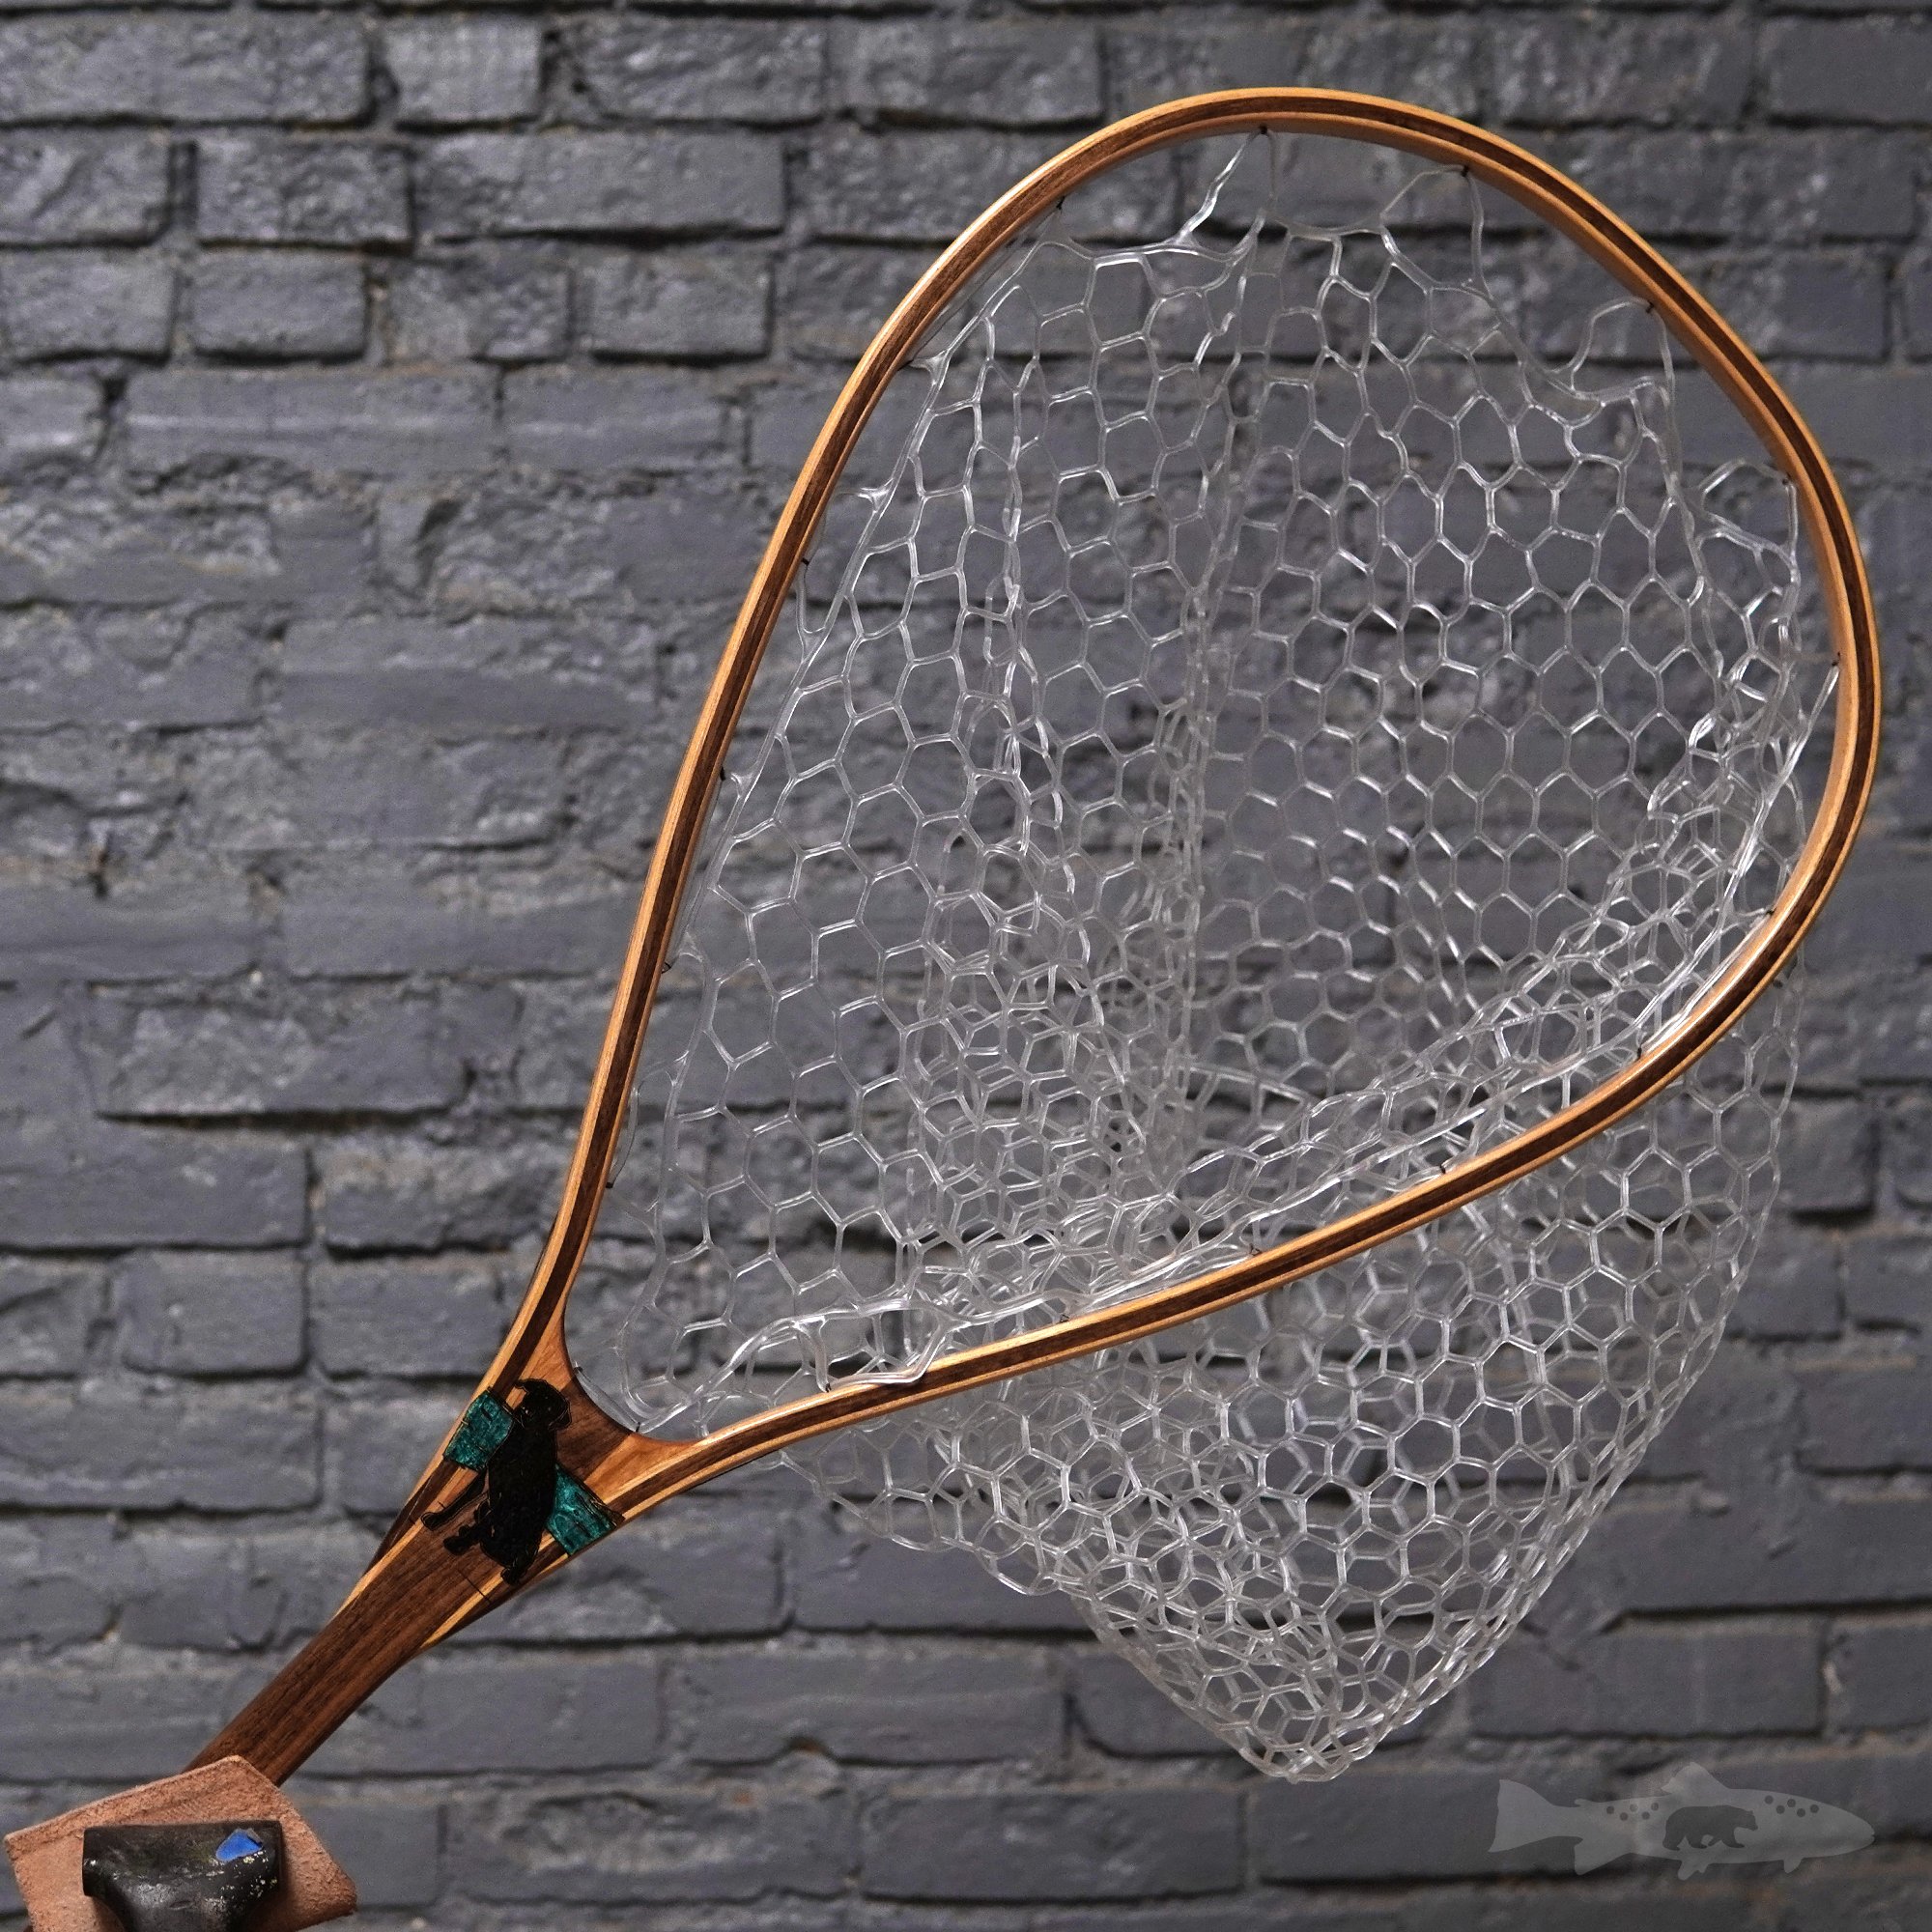 Landing net replacement bags - Fishing Net Bag made from rubber netting —  Wayward Handcrafted Fly Fishing Gear - made in Philadelphia USAWood Fly Fishing  net - Handcrafted Custom Fly Fishing net